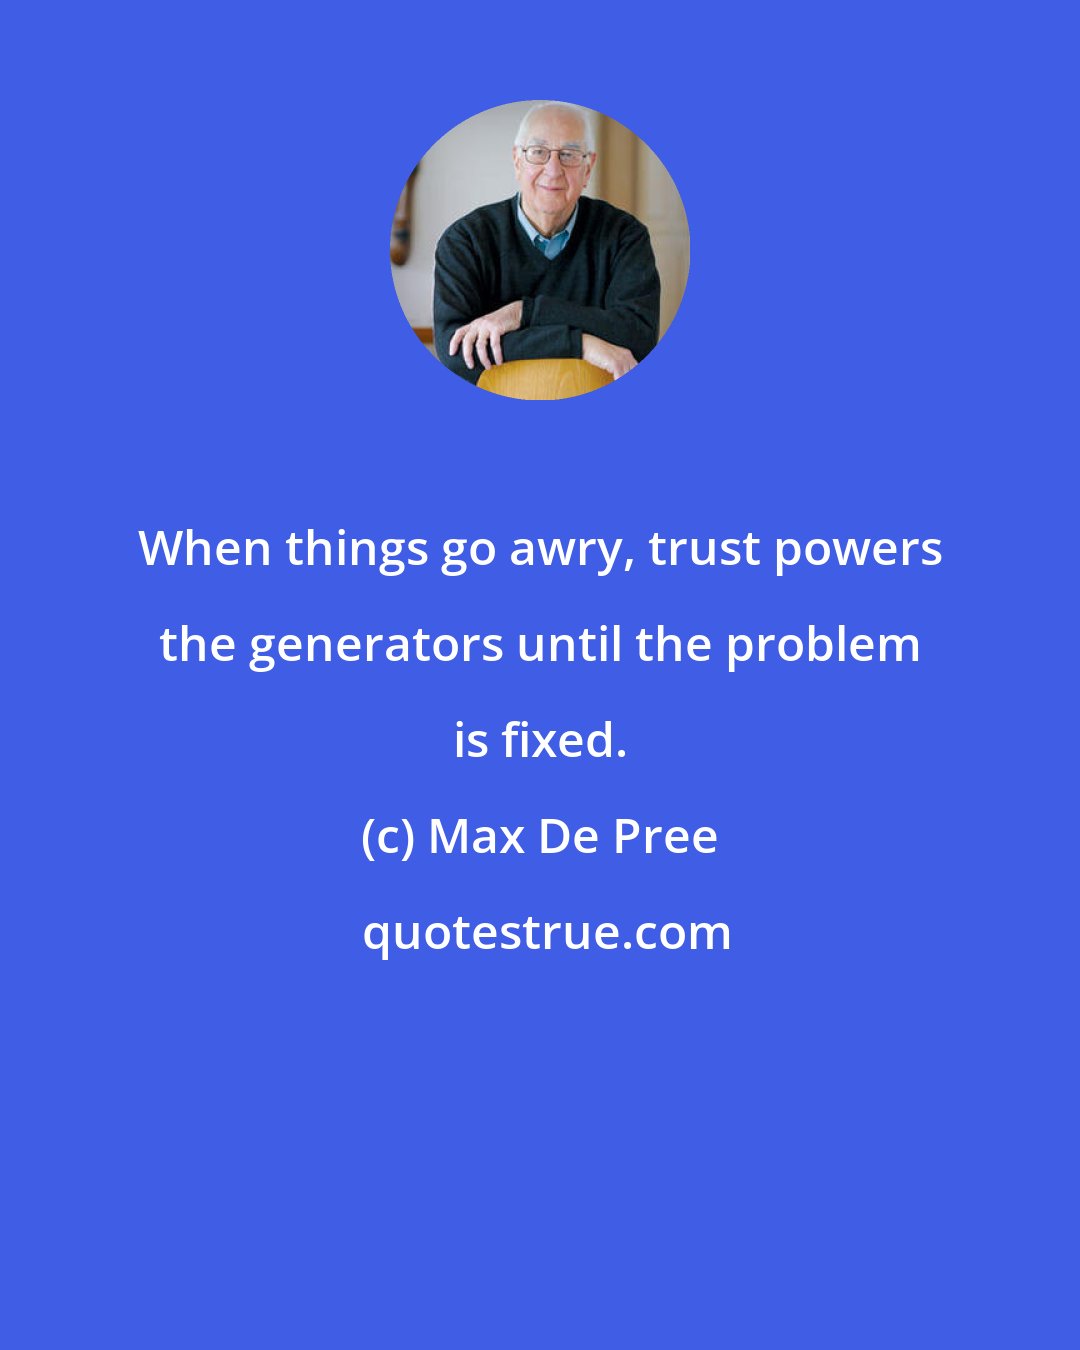 Max De Pree: When things go awry, trust powers the generators until the problem is fixed.